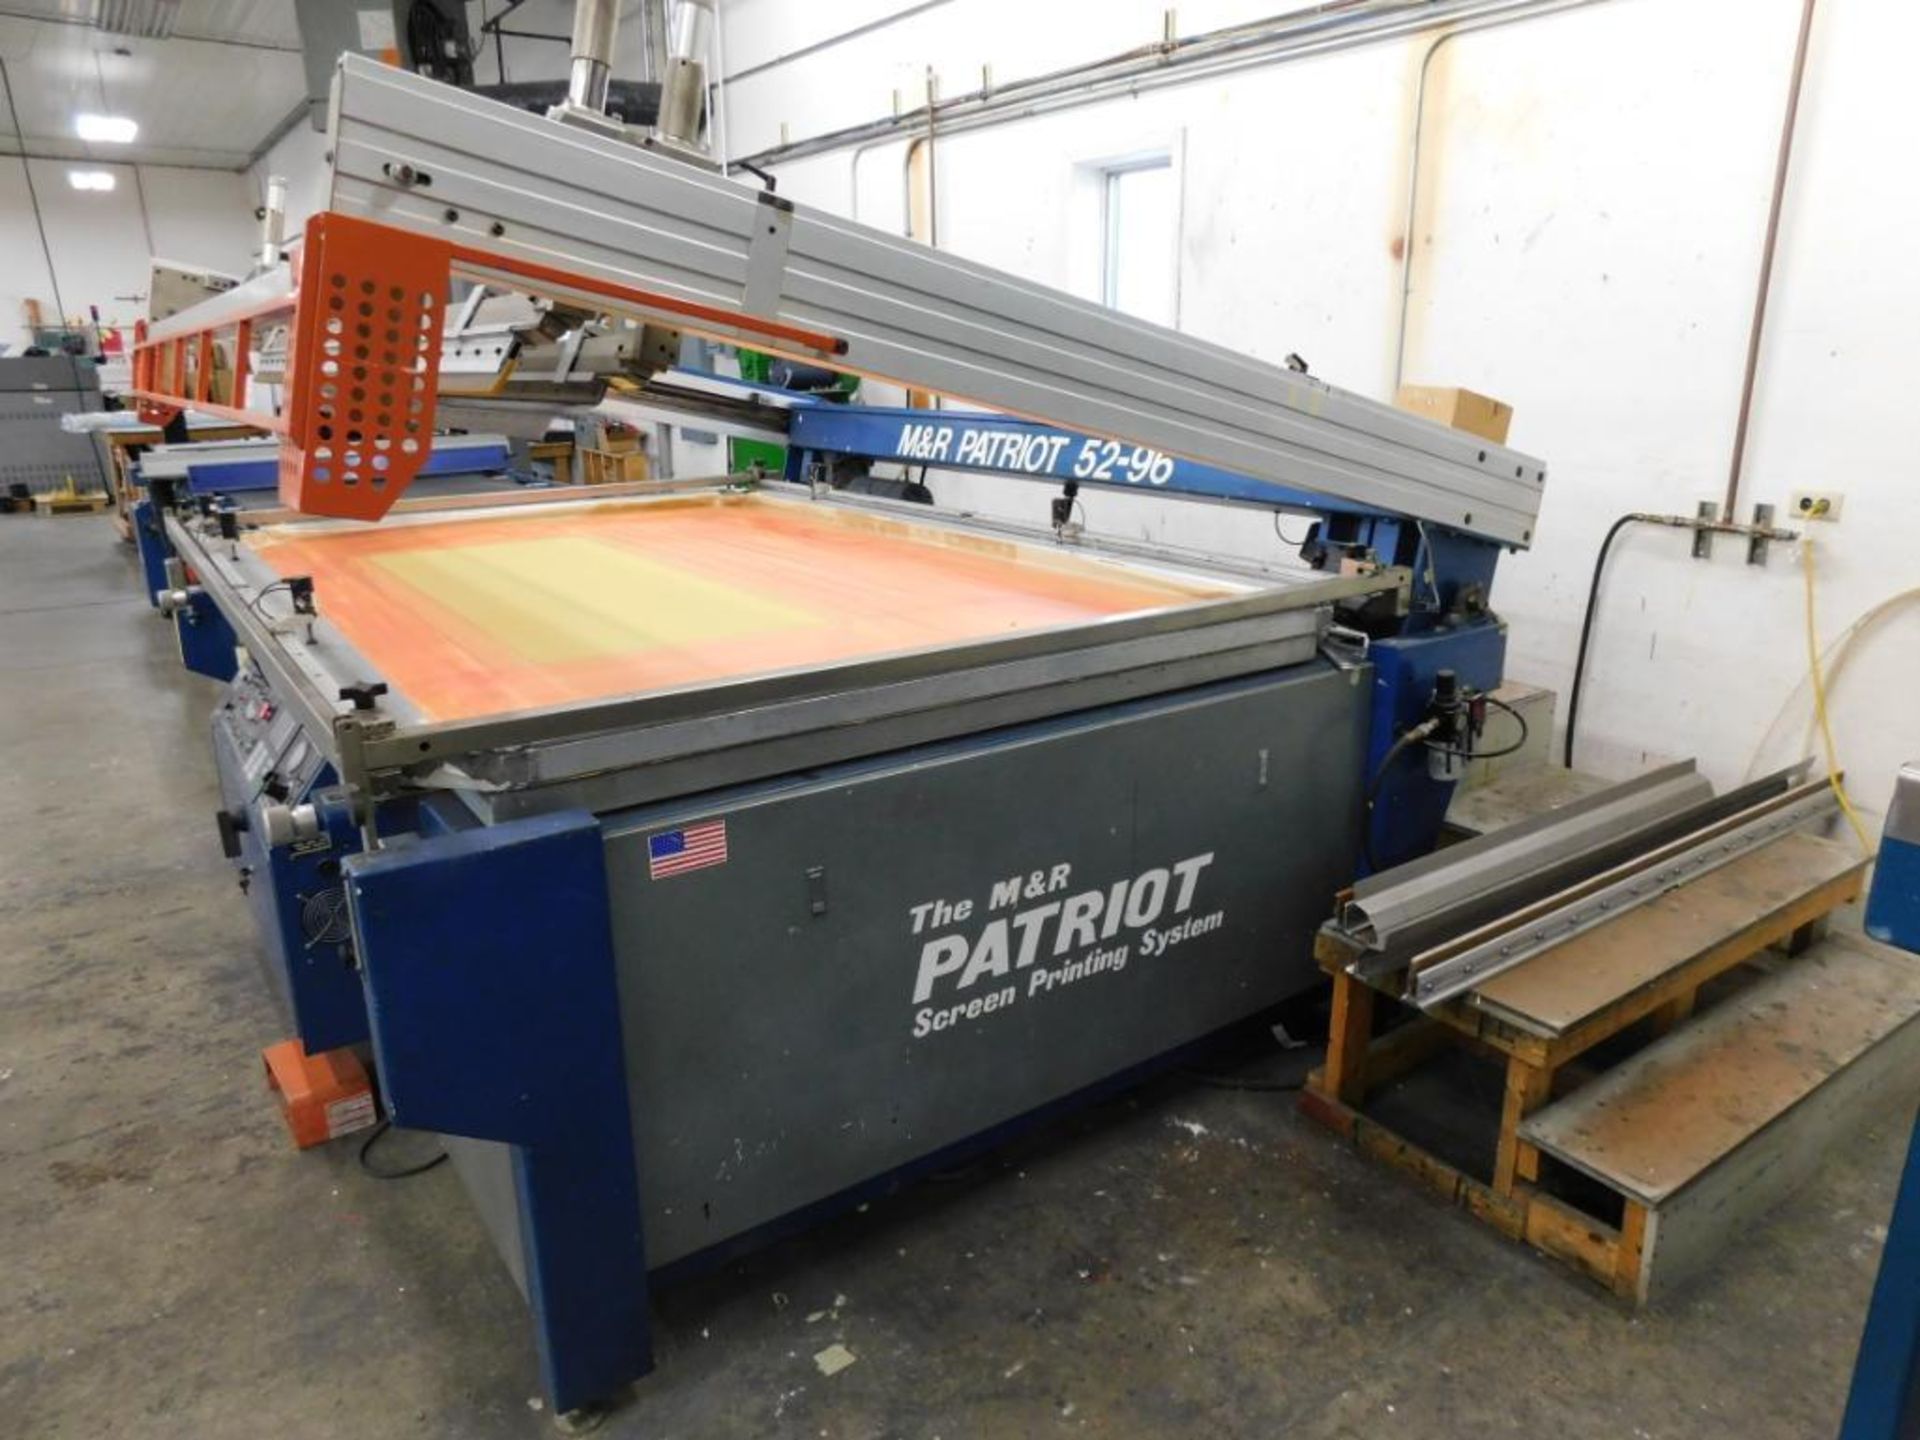 M&R Patriot Graphics 52-96 Screen Printing System Model PAT-52/96, S/N 069730602P (LOCATED IN ST. AU - Image 4 of 9